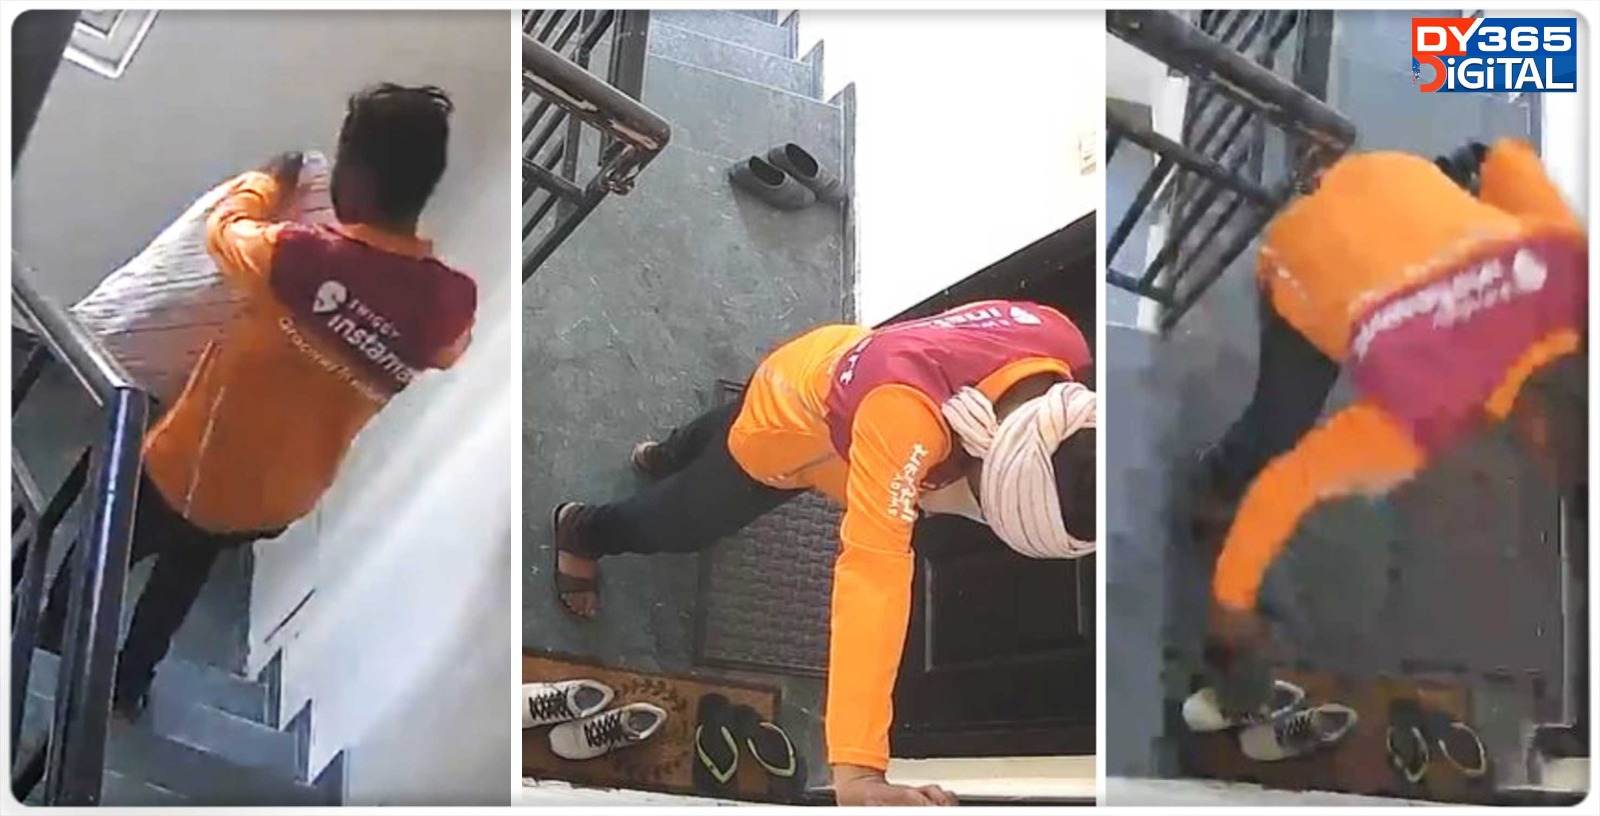 Swiggy Delivery Man Caught On Tape Stealing Shoes From Customer | Watch Video